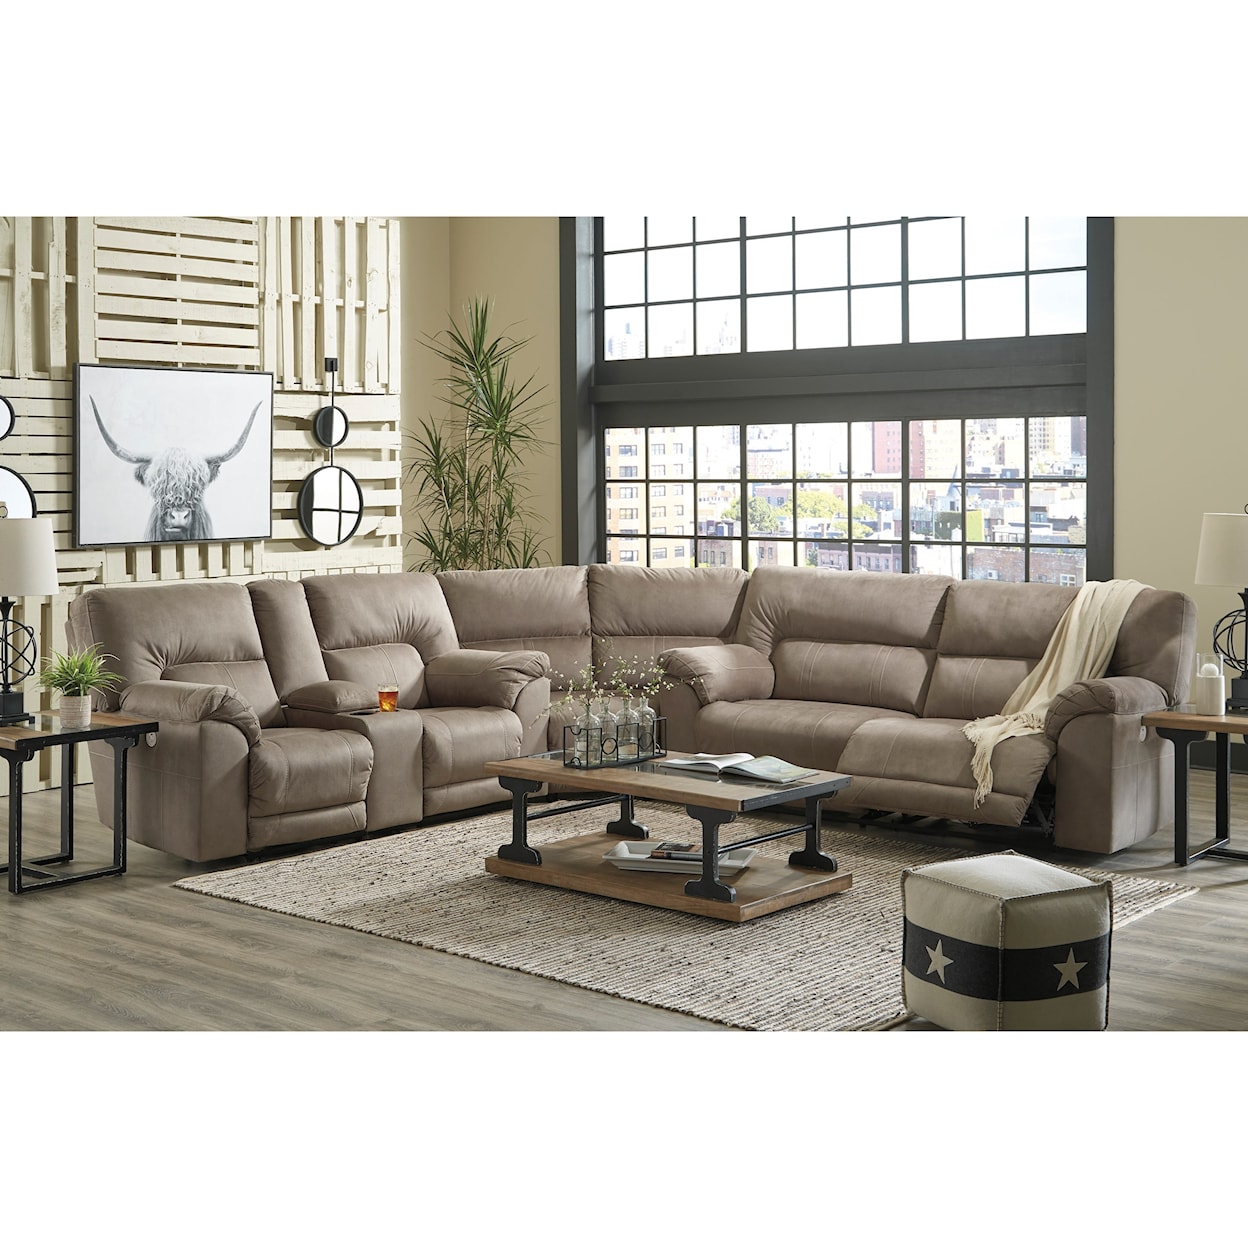 Benchcraft Cavalcade Power Reclining Sectional